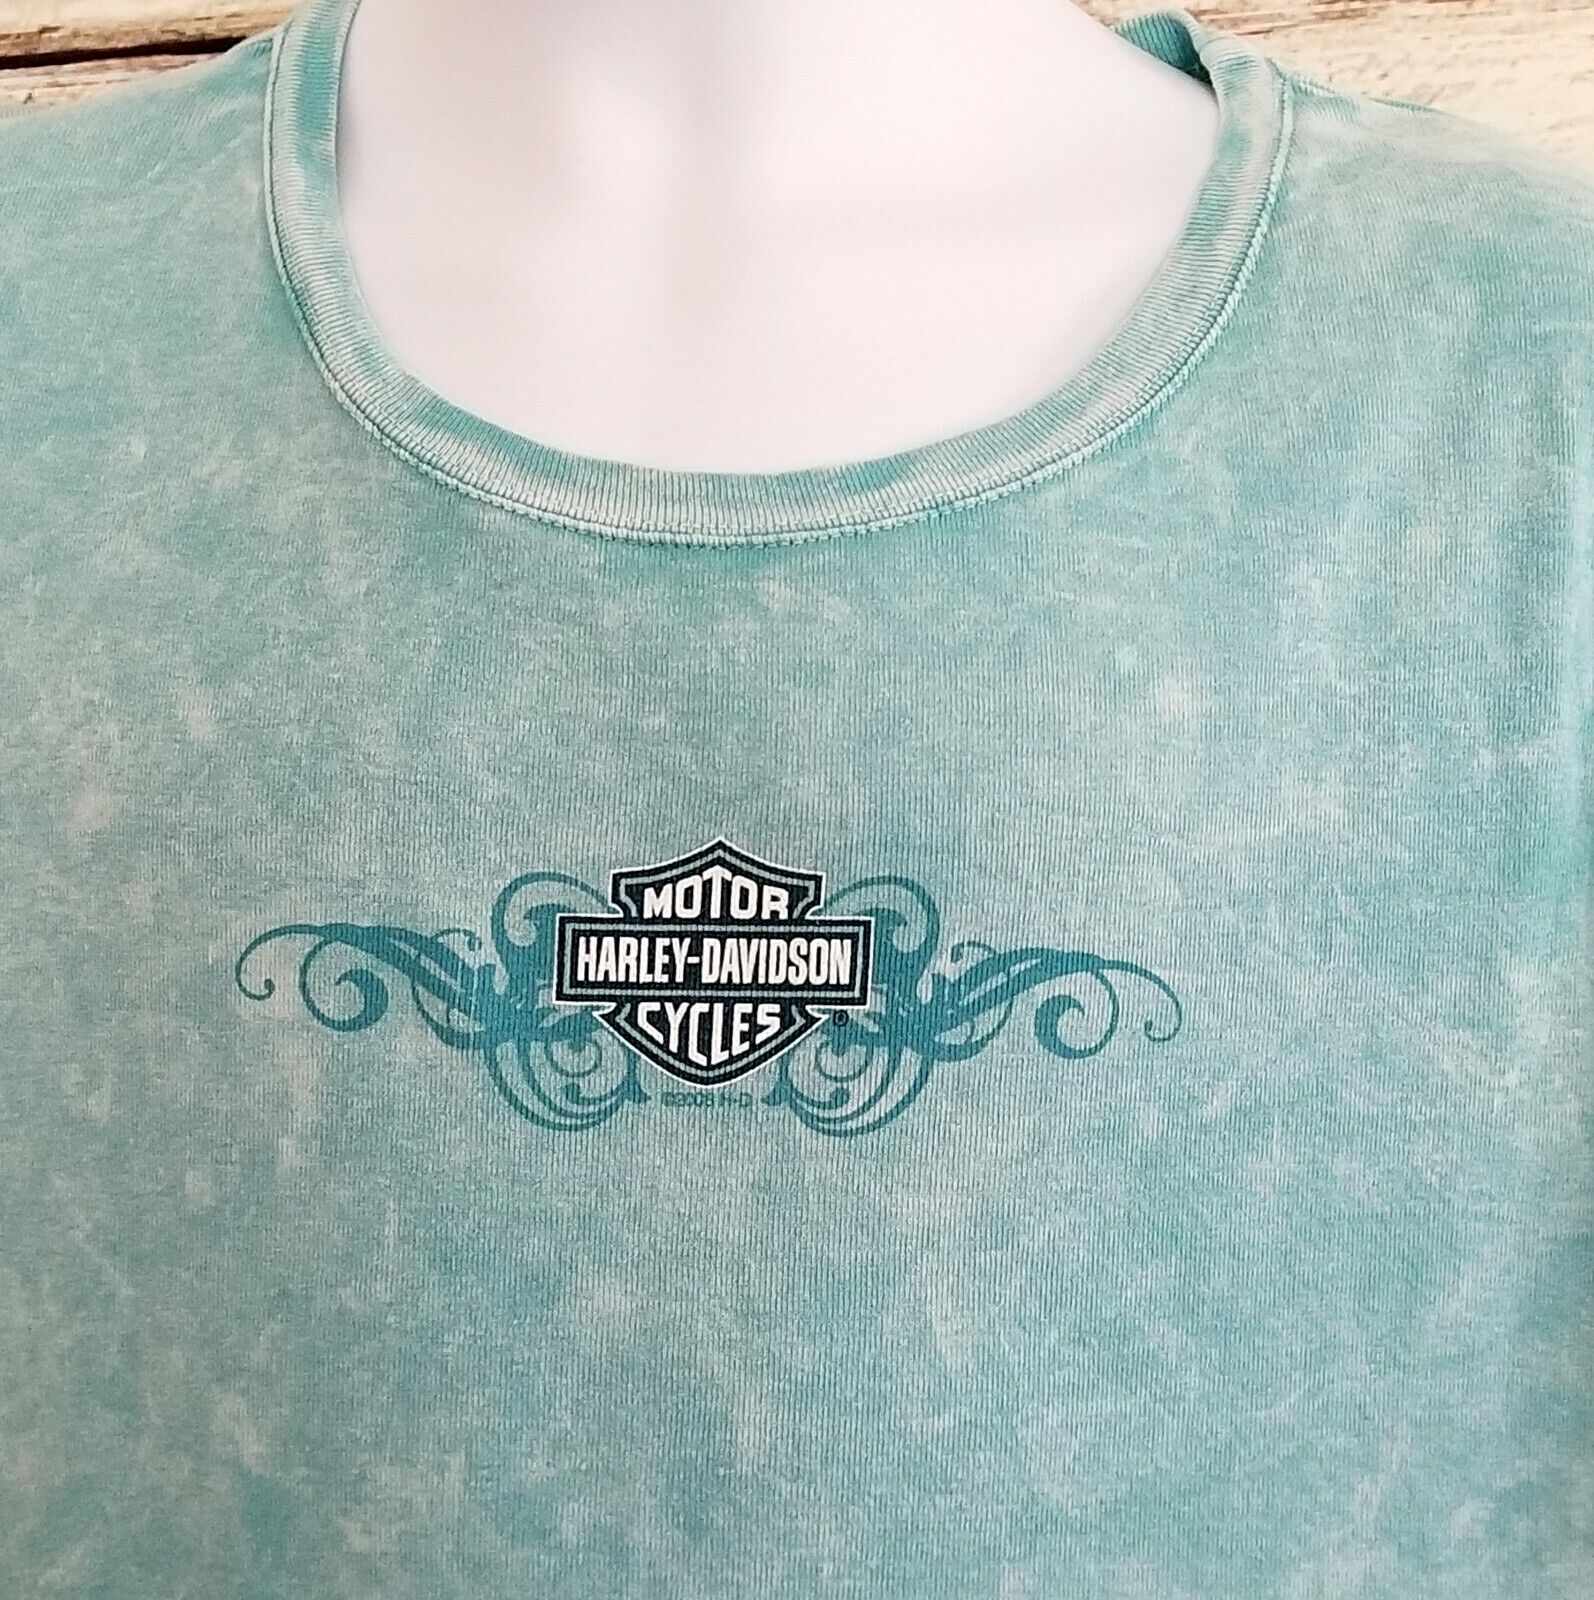 Harley Davidson Youth Size L Large Girls Teal Color Top : Fast Shipping